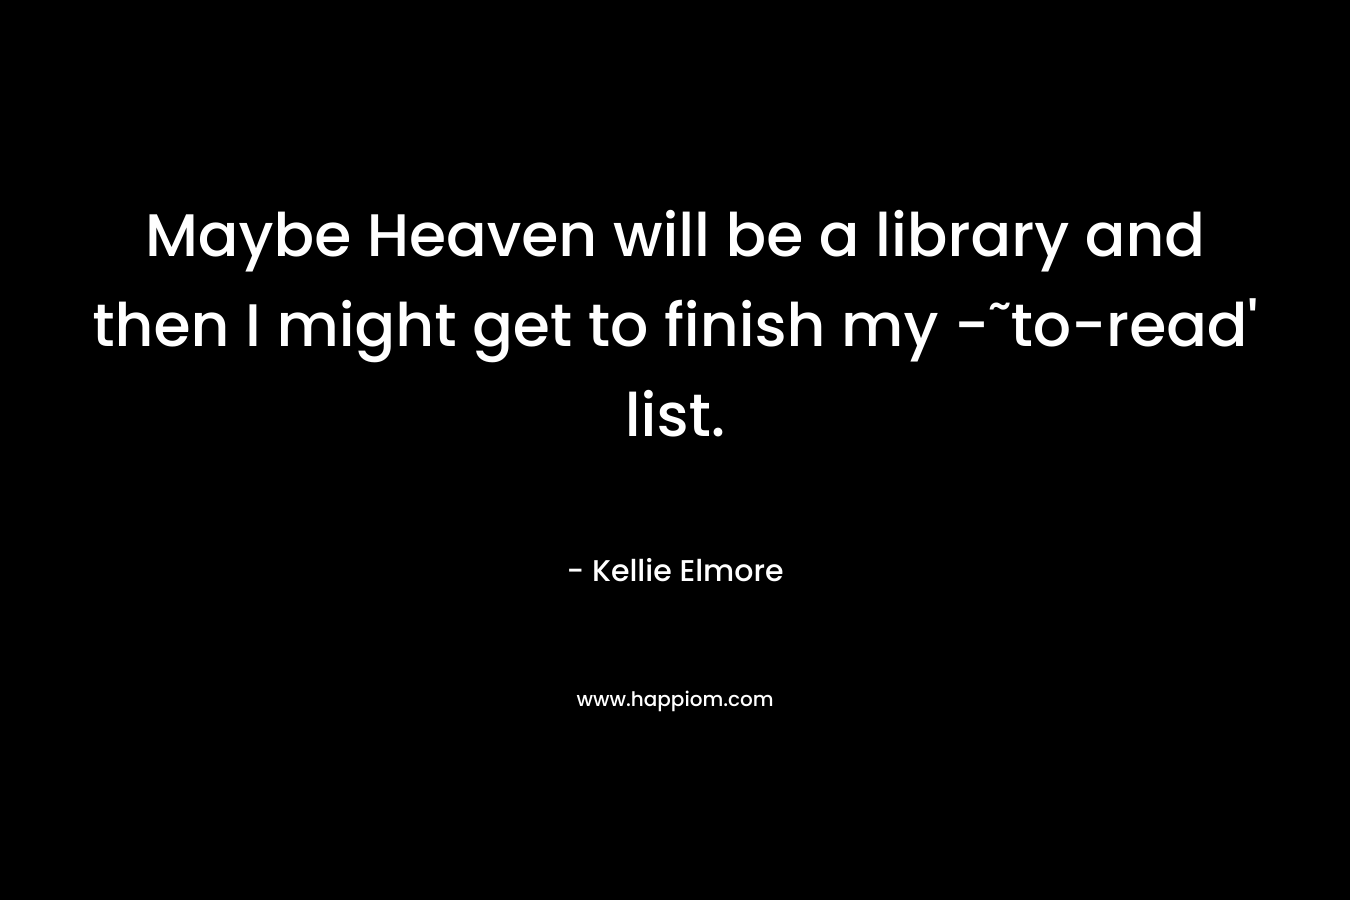 Maybe Heaven will be a library and then I might get to finish my -˜to-read' list.